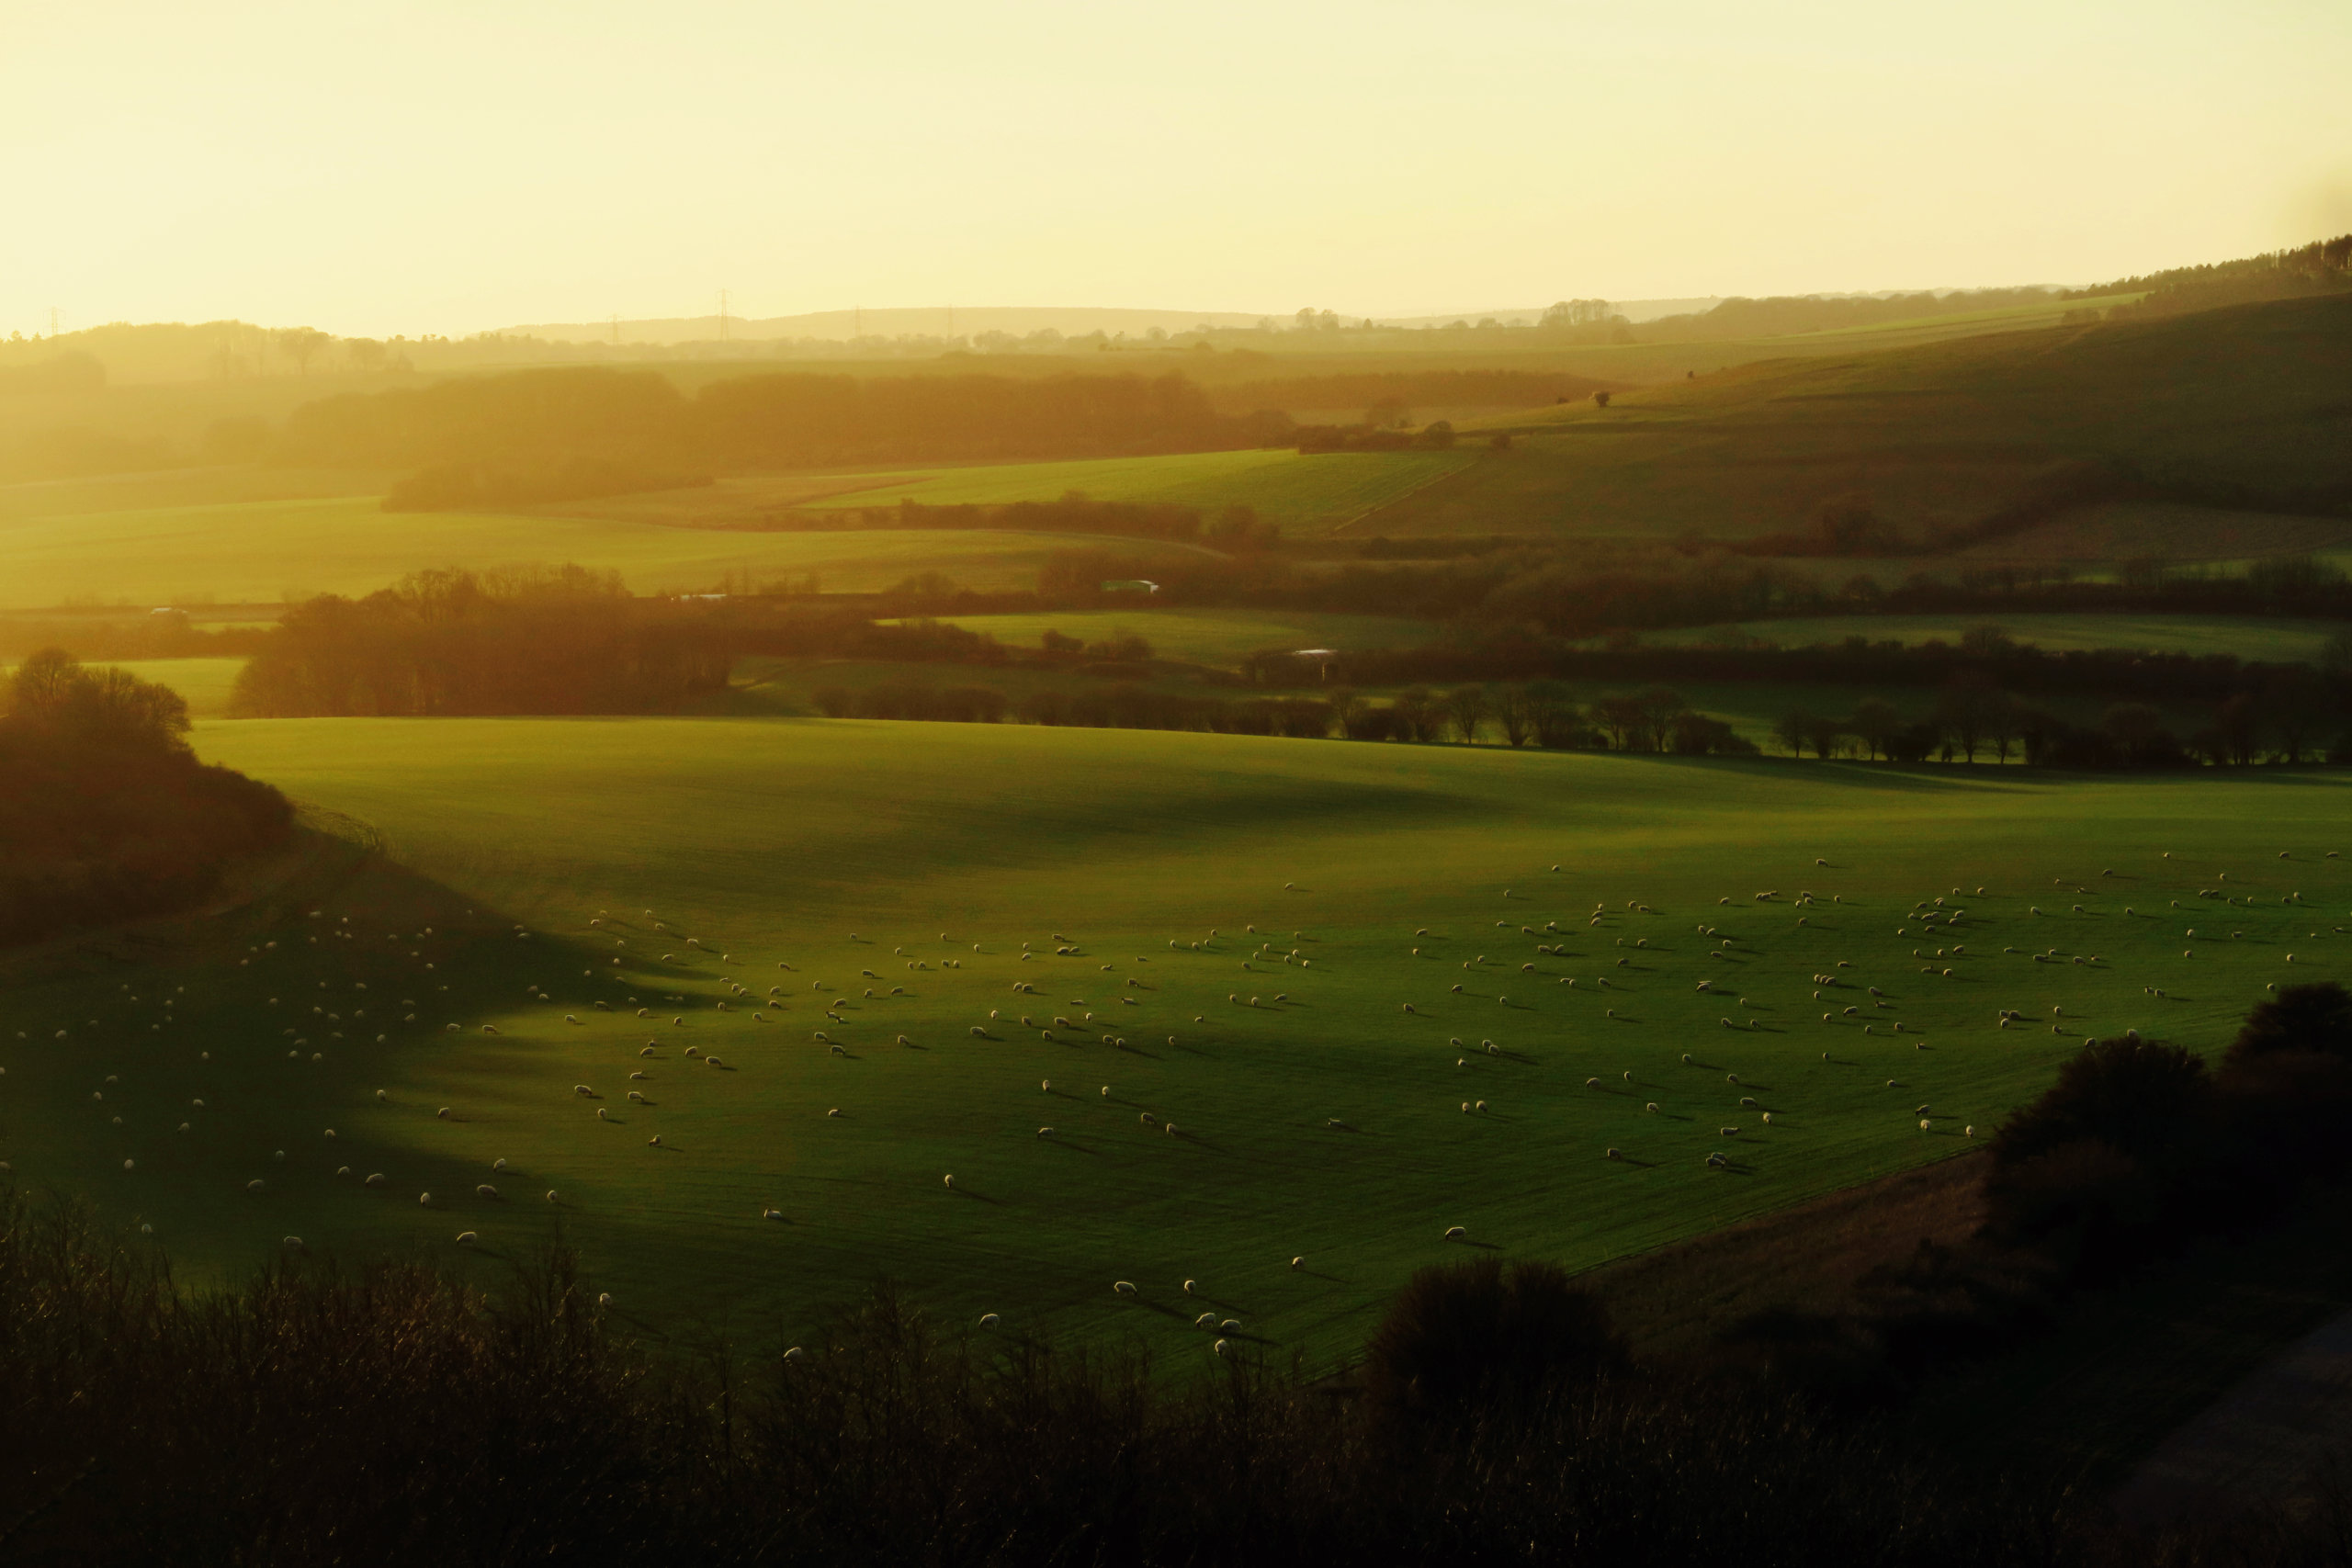 Sunrise over the English countryside hills.